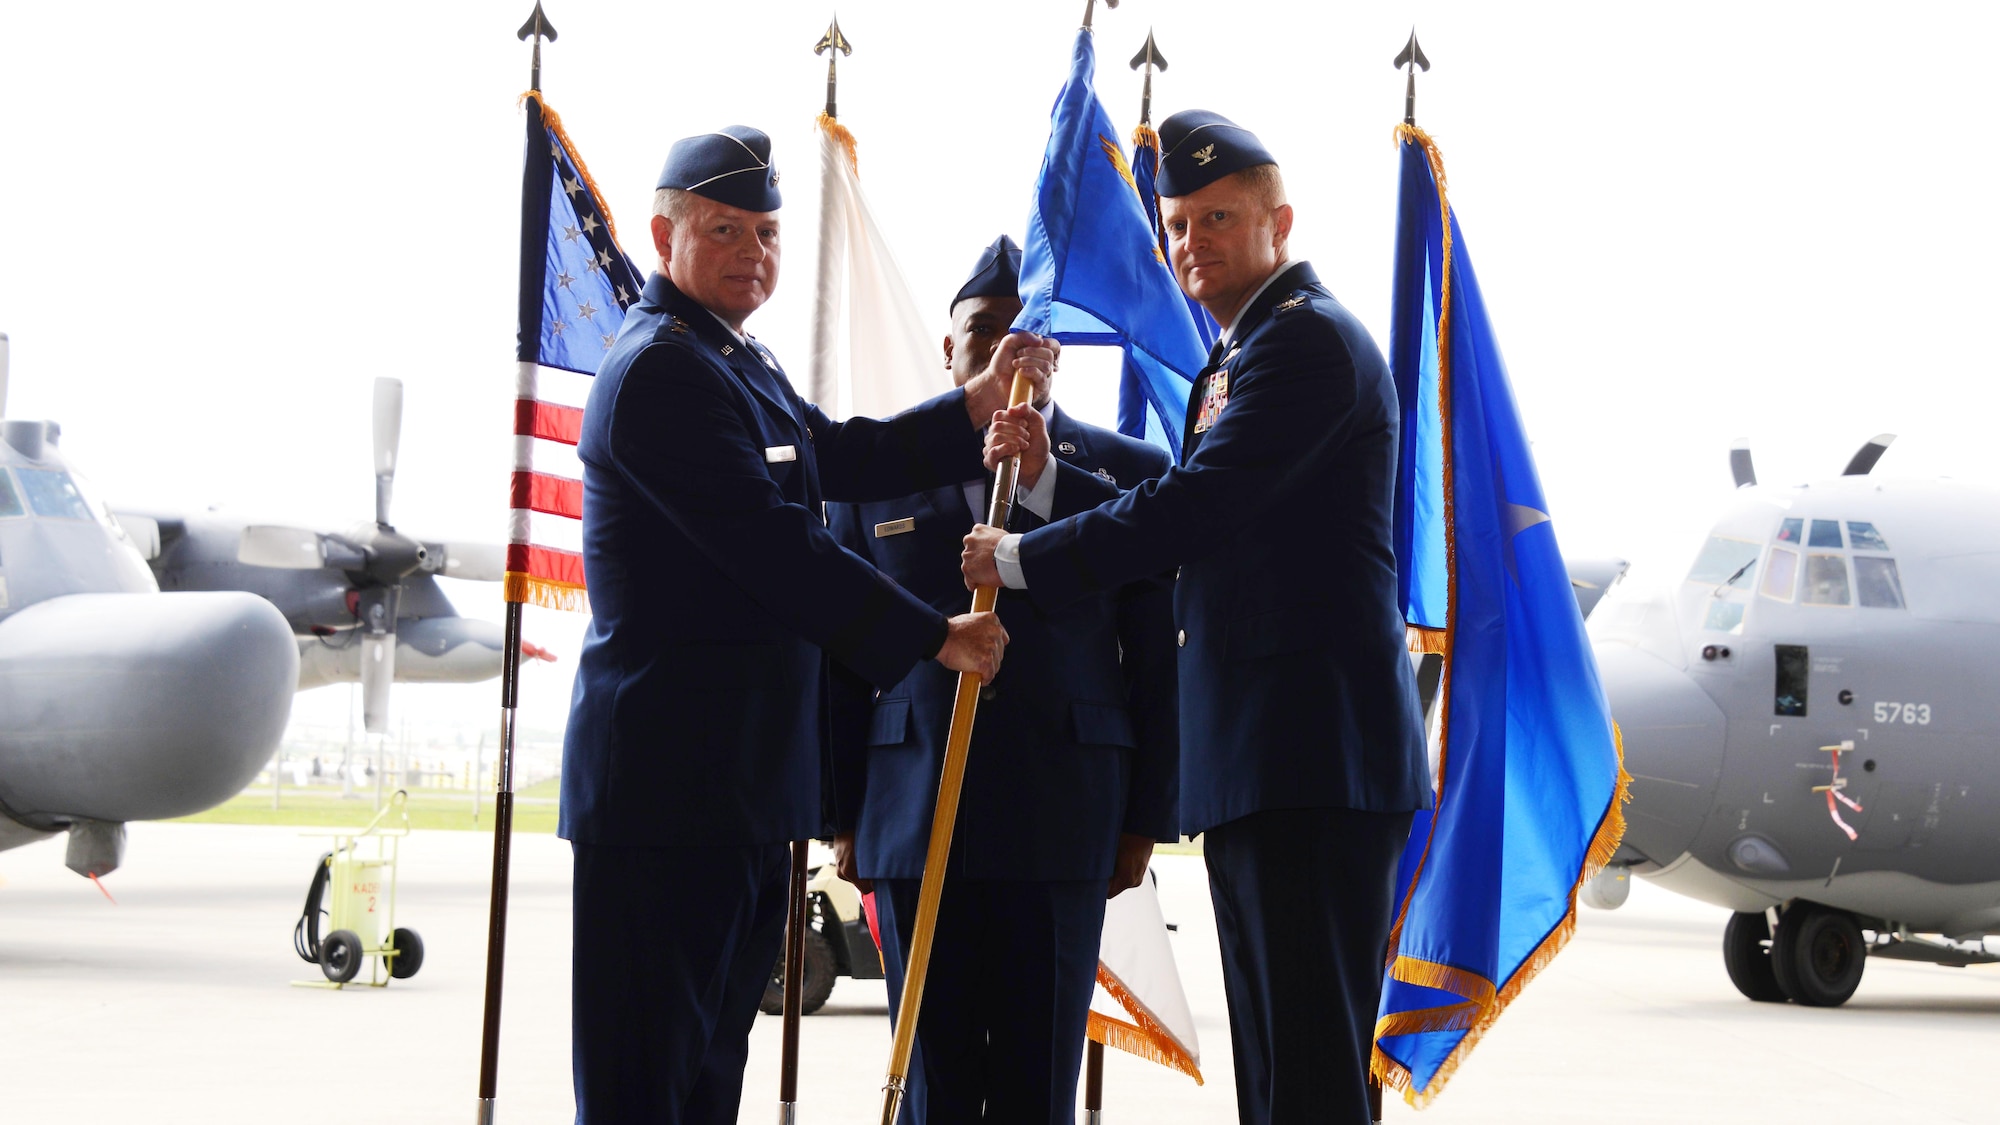 Col.  William C. Freeman accepts the guidon from Maj. Gen. Morris E. Haase, Air Force Special Operations Command vice commander, during an Assumption of Command ceremony held May 8, 2015 on Kadena Air Base, Japan.  The 353rd Special Operations Group is the only Air Force Special Operations unit in the Department of Defense’s largest area of responsibility.  (U.S. Air Force photo by Tech. Sgt. Kristine Dreyer)